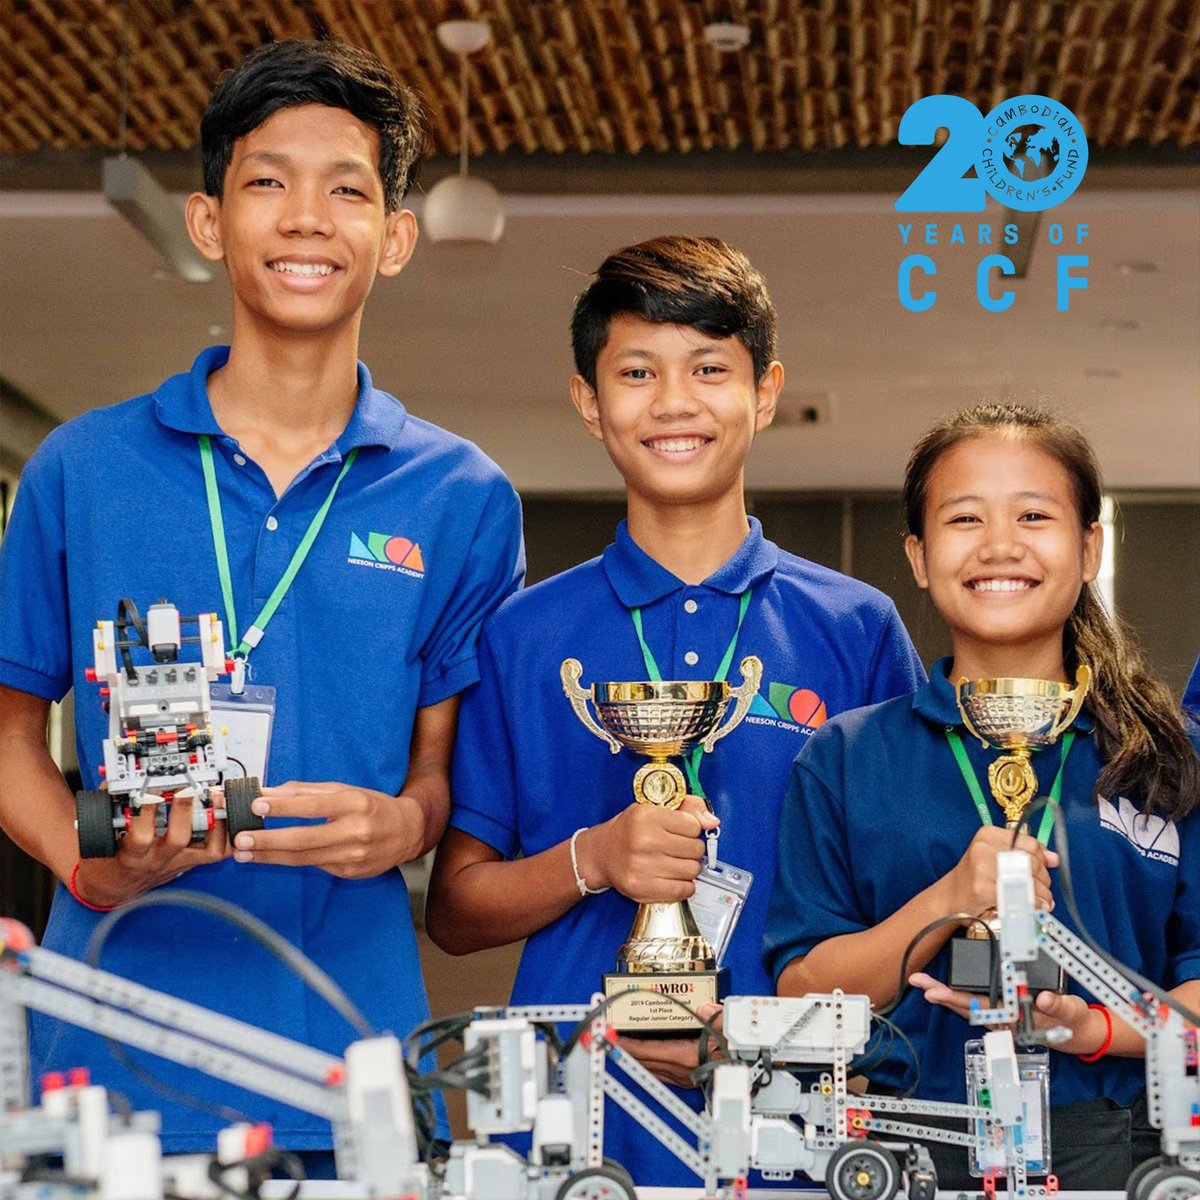 In 2019, CCF triumphed as both junior and senior teams clinched victory at the World Robot Olympiad national contest. The students proudly represented Cambodia in Győr, Hungary, during the International Round, challenging 73 nations. #STEM #robotics #CCF #20YearsofCCF